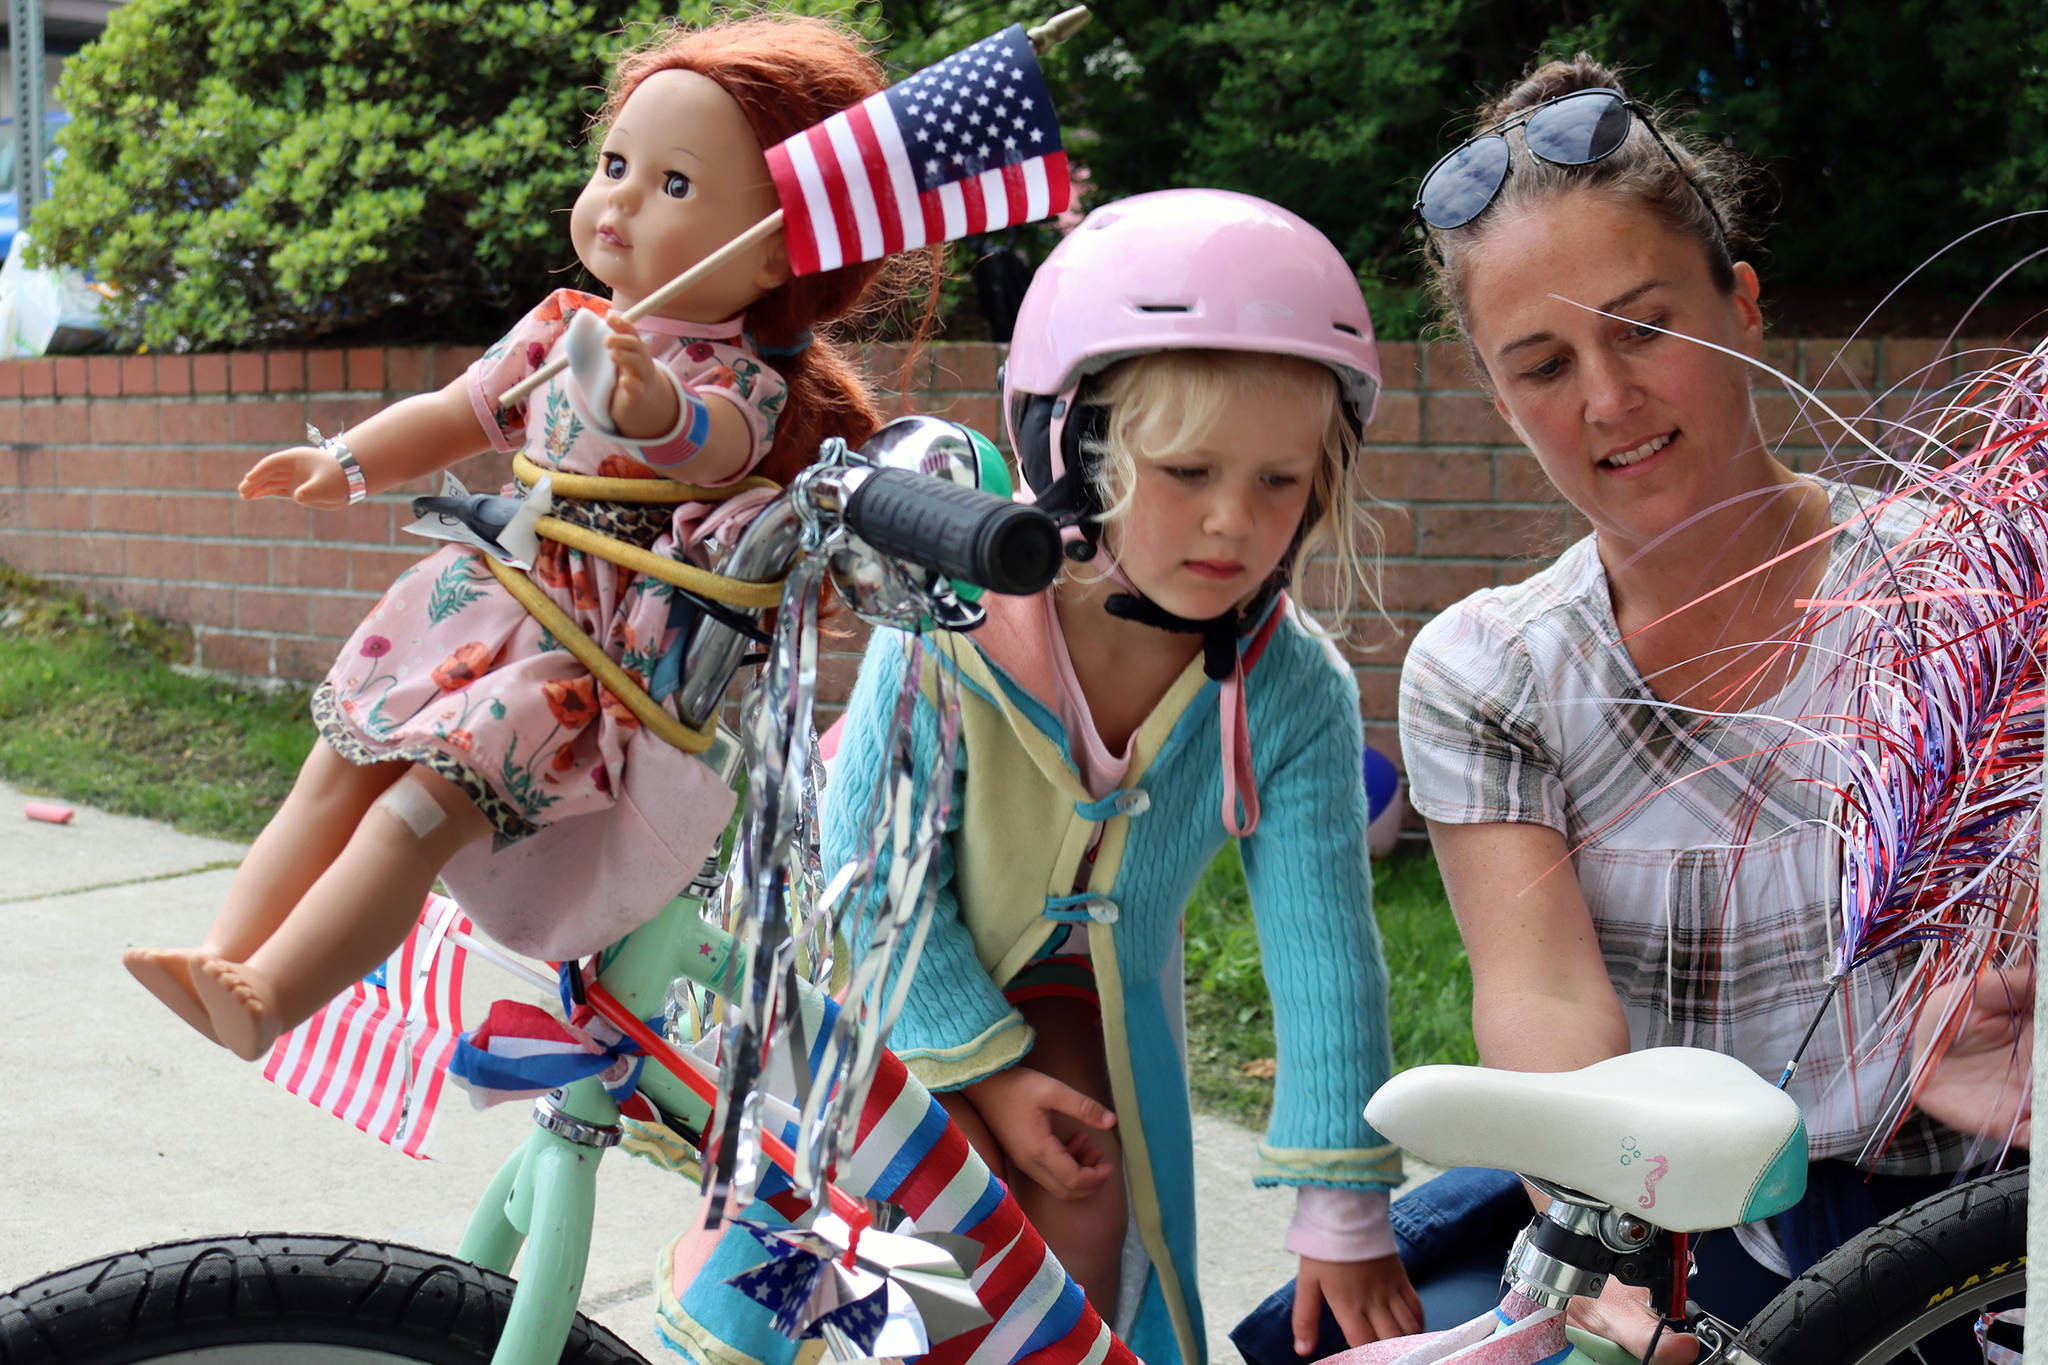 Imogen Resneck, 4, and Jamie Buehner finish up decorating a bike outside the Douglas Public Library parking garage on July 3, 2021. Resneck’s doll, Robbie, was bound to the bike like an amber-haired figurehead because “she wanted to go to the parade,” Resneck said. (Ben Hohenstatt / Juneau Empire)